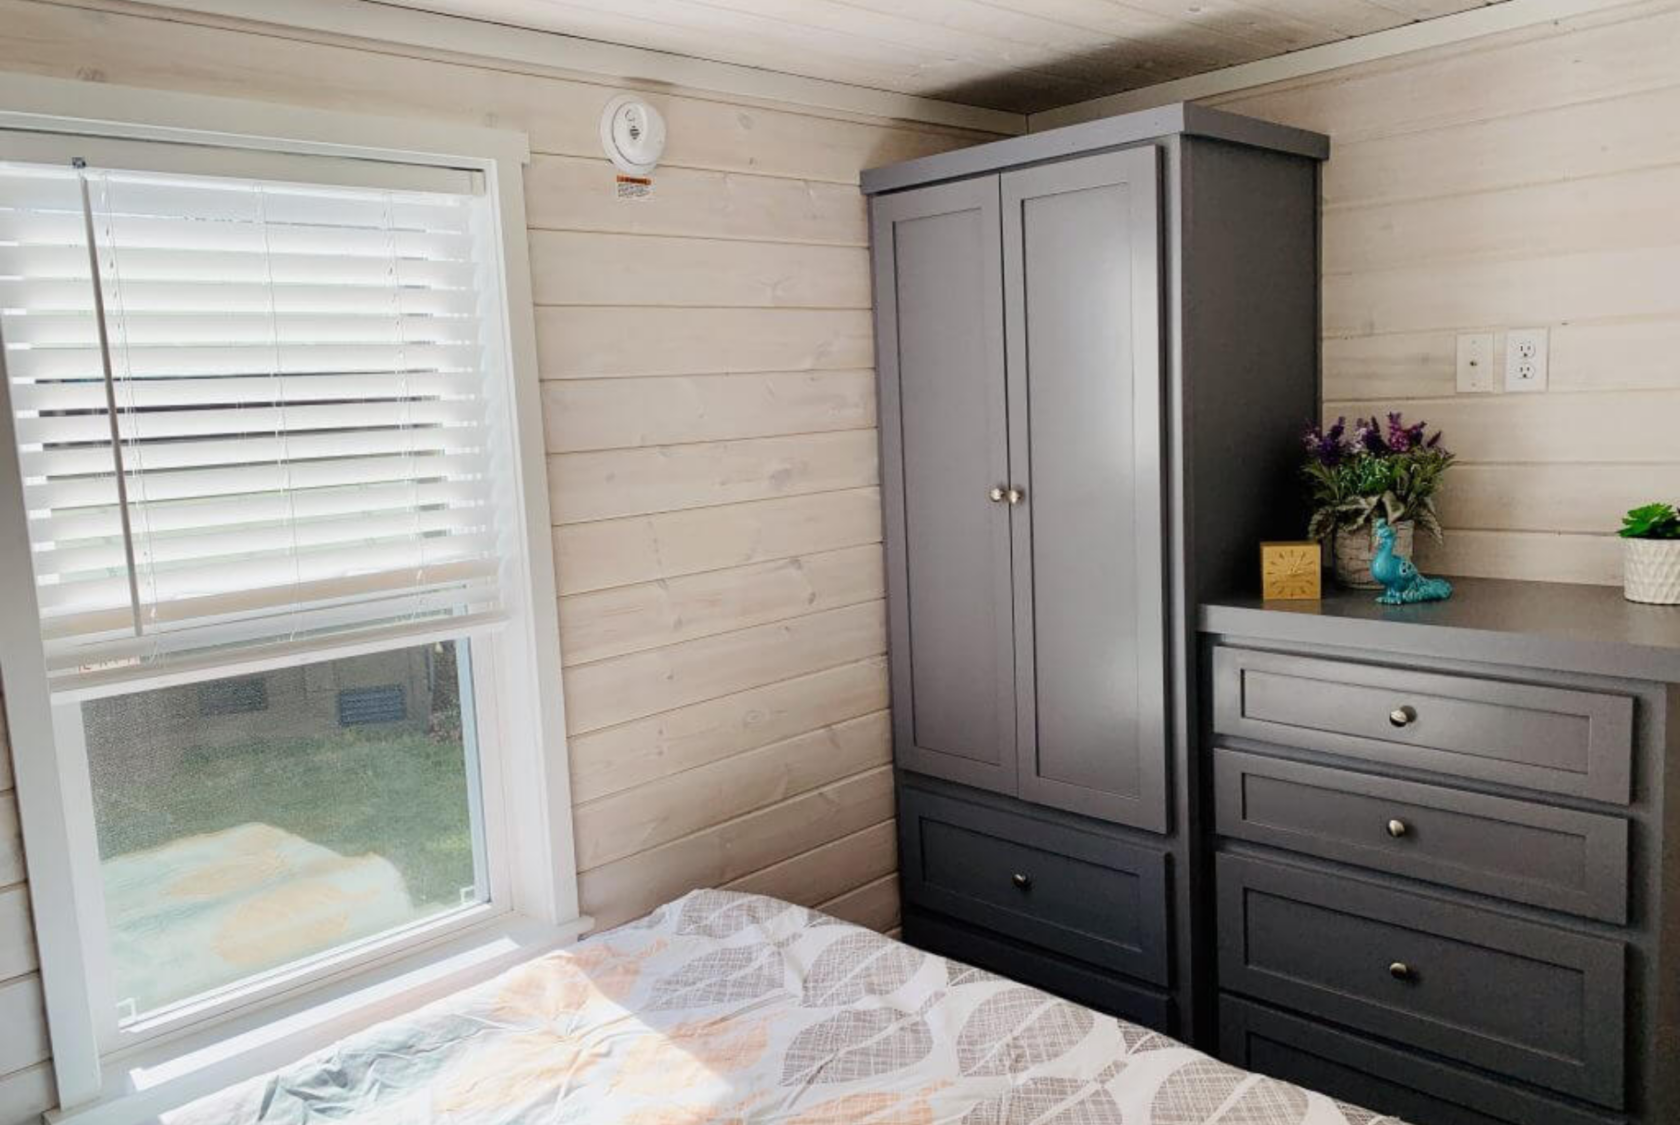 Horseshoe tiny home bedroom with built-in wardrobe and dresser.